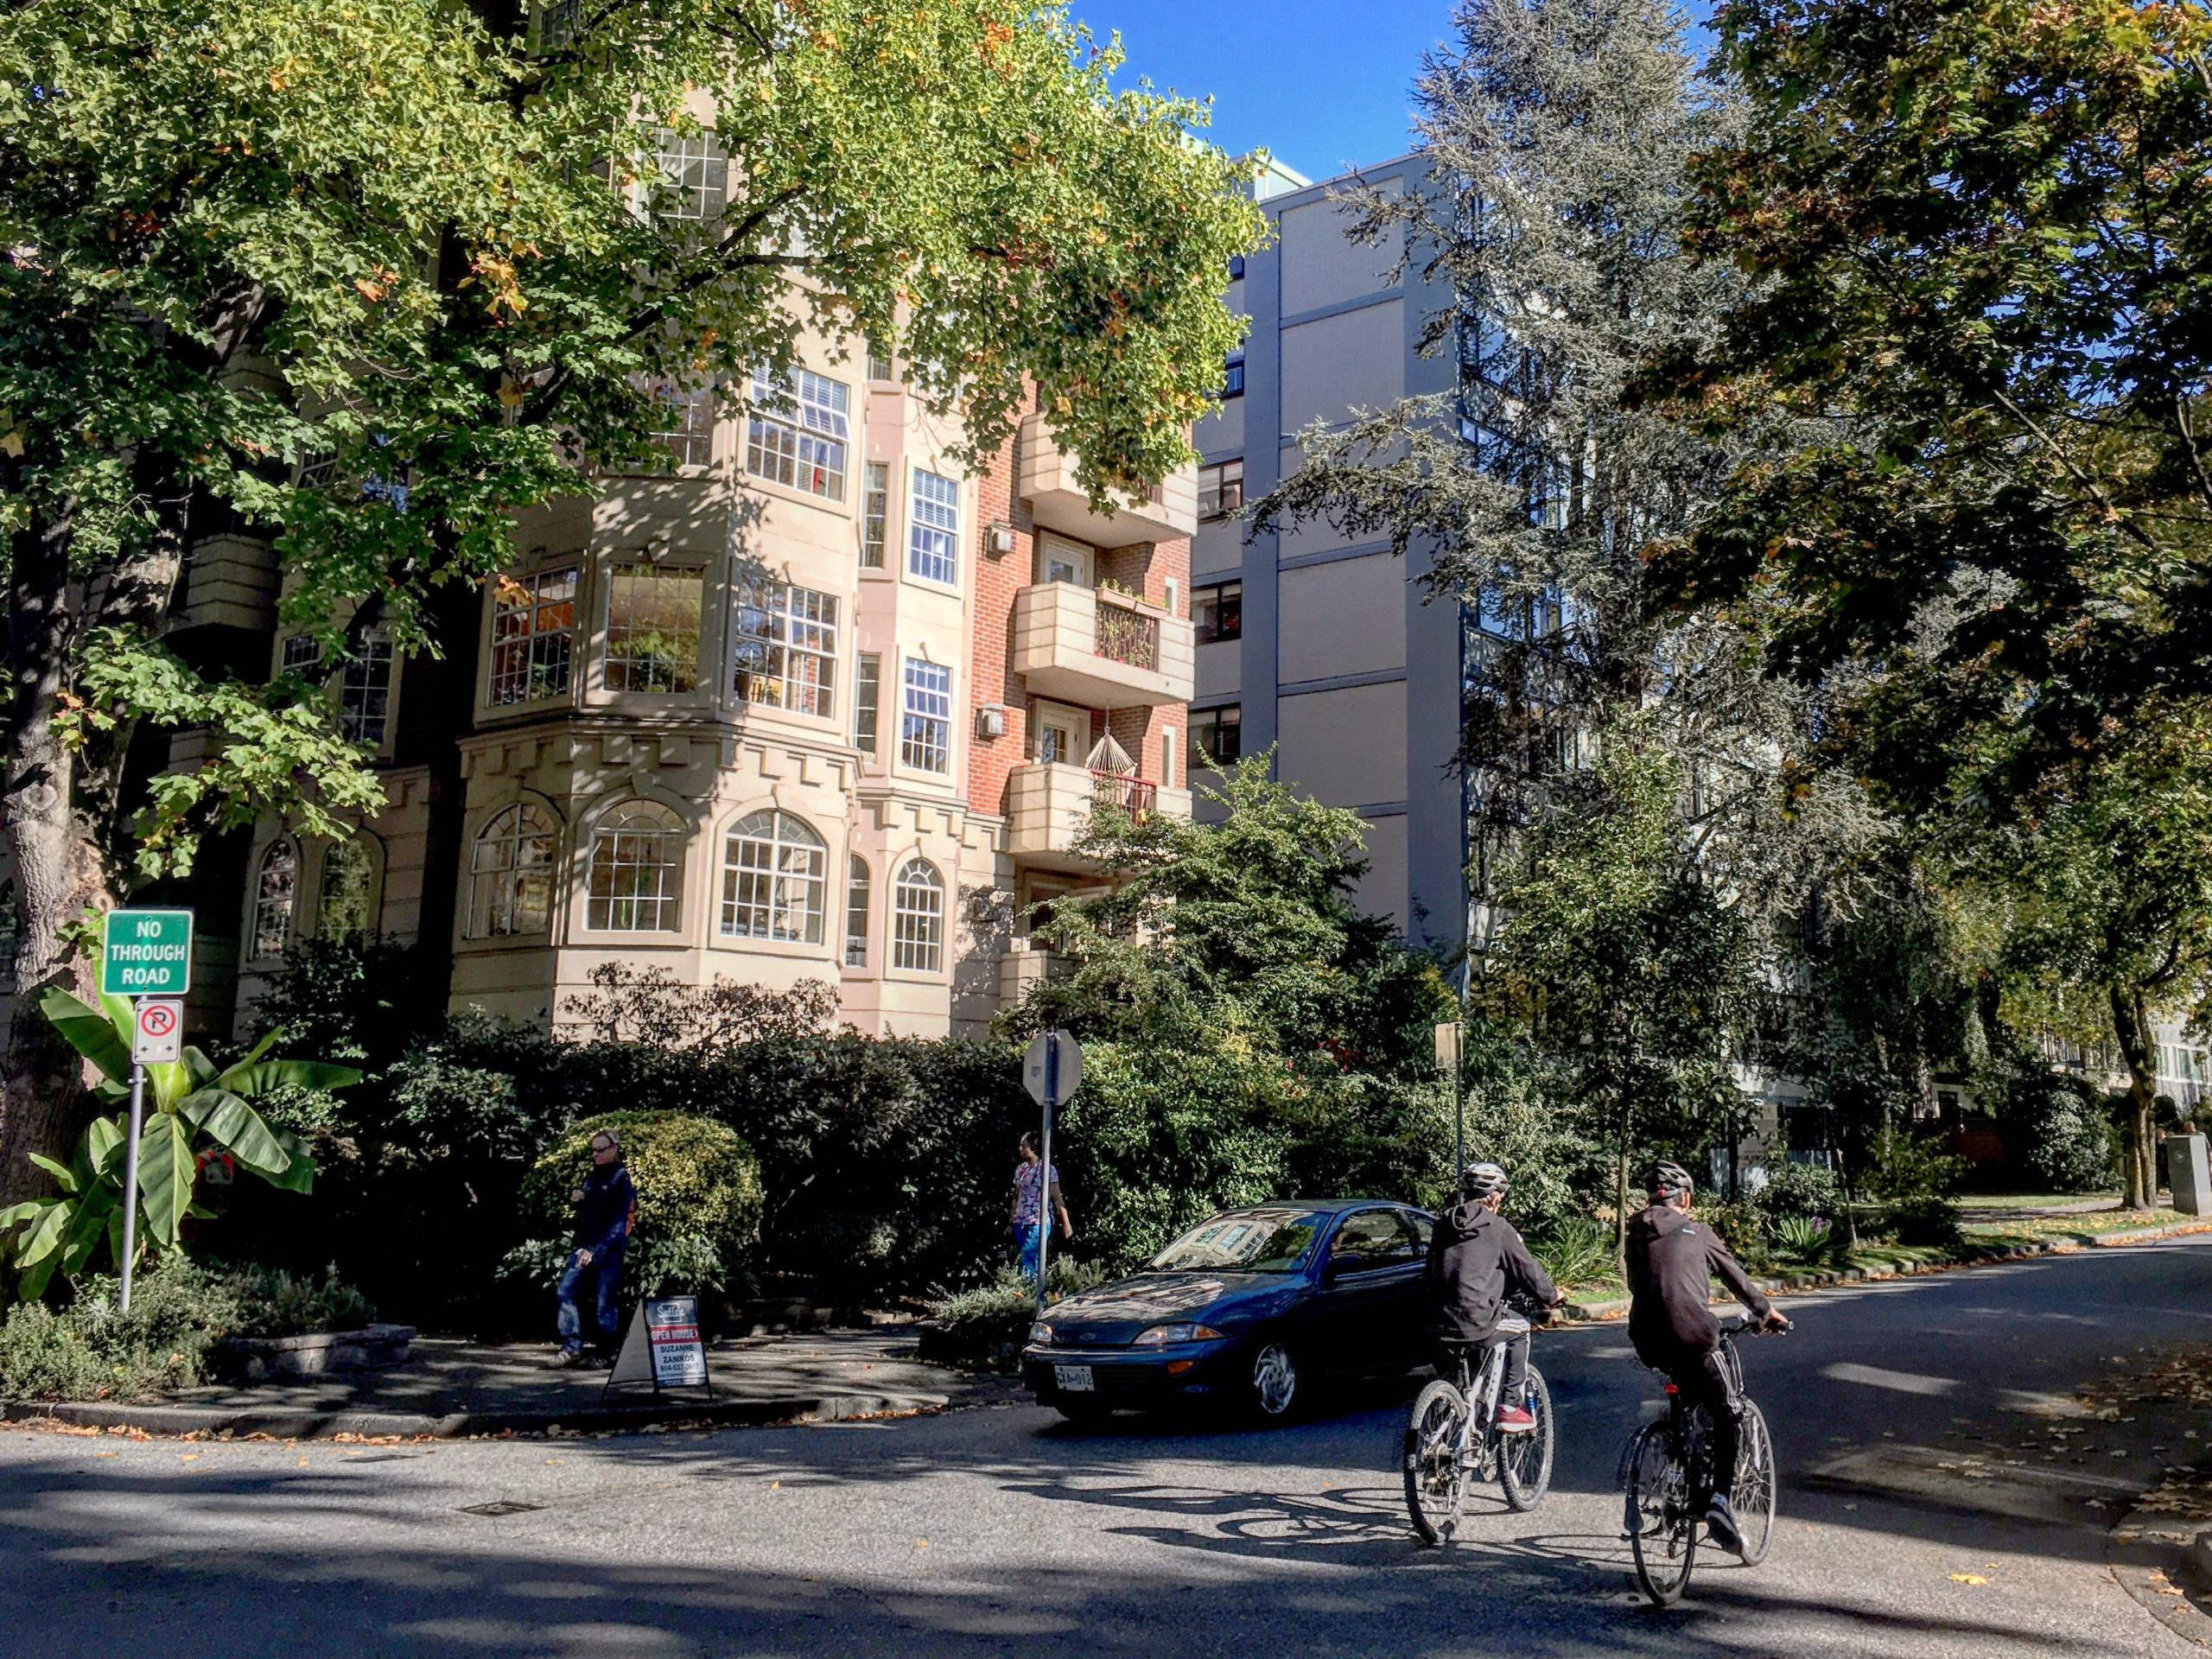 tree-lined street with mid-rise housing and two bicyclists riding on the street.